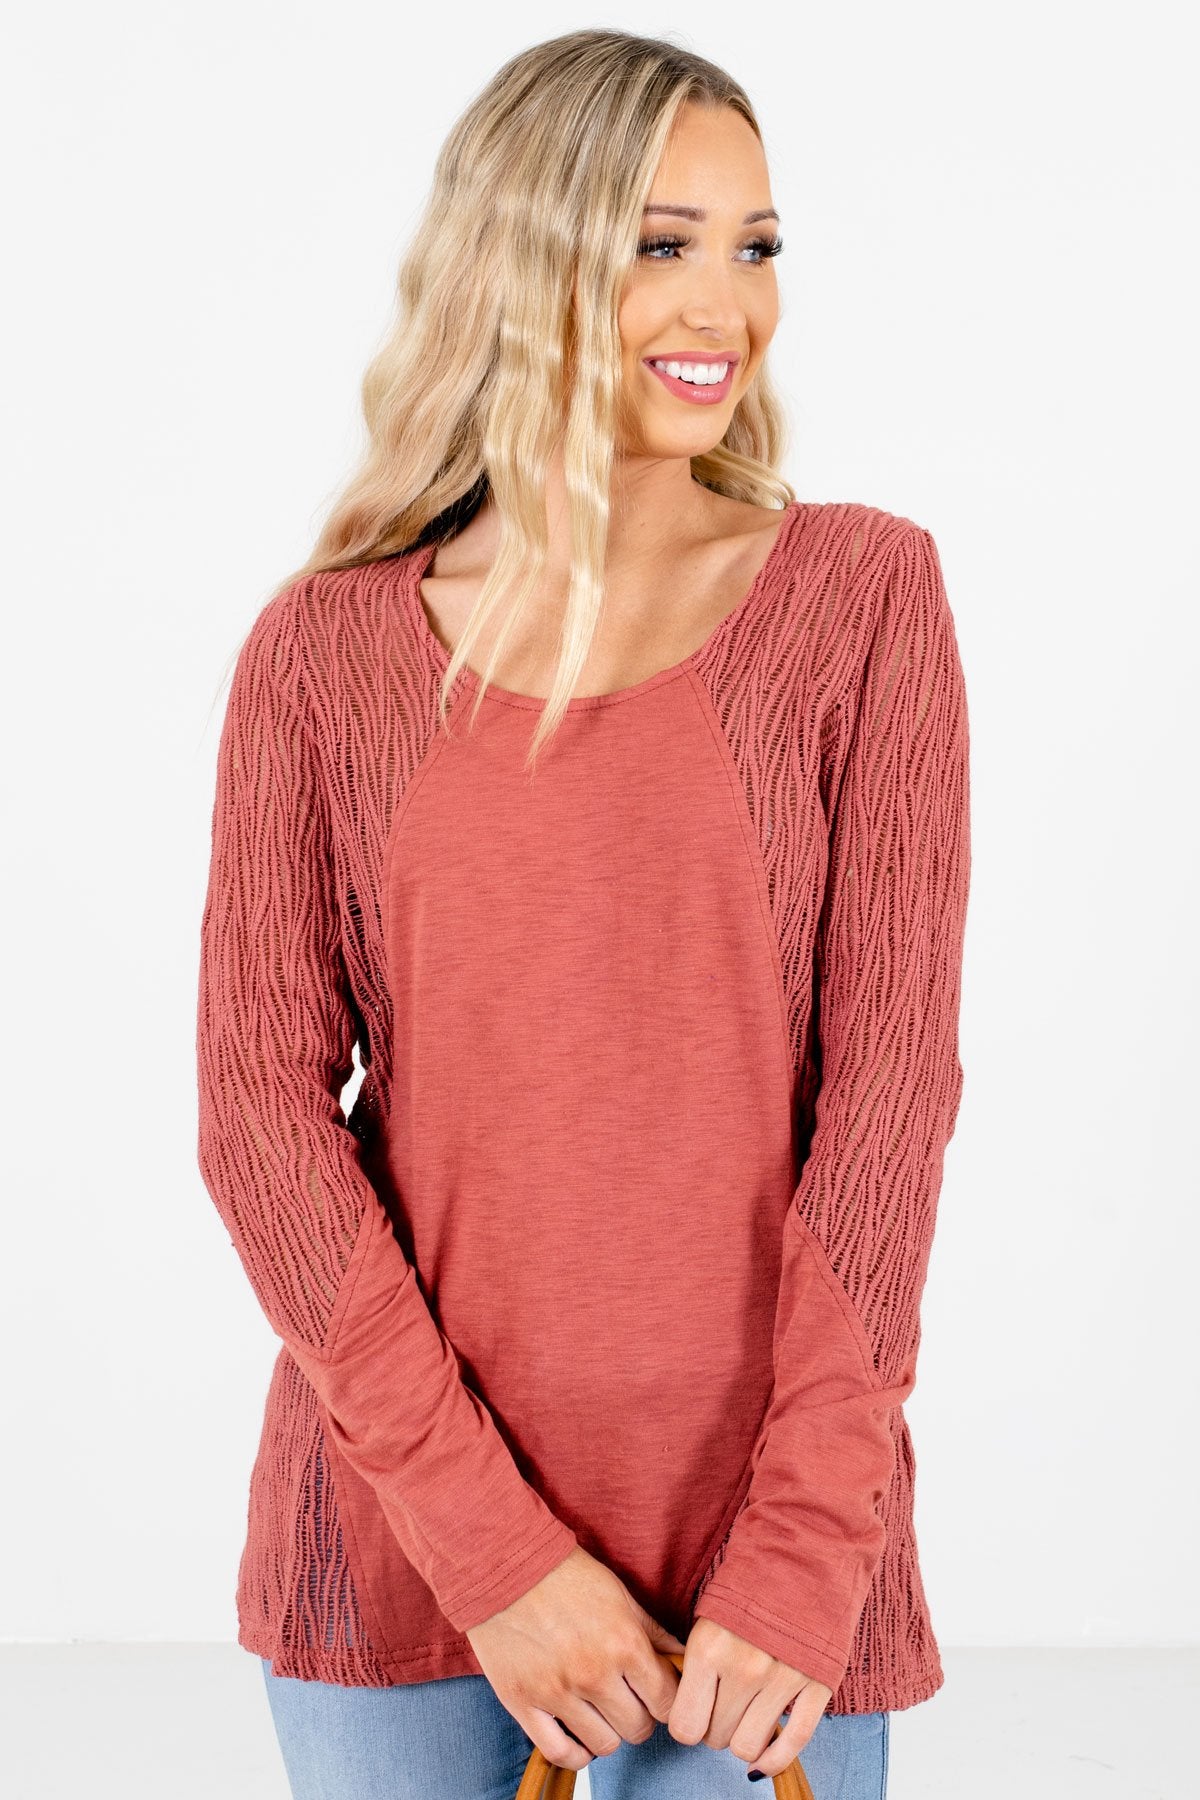 Coral Cute and Comfortable Boutique Tops for Women